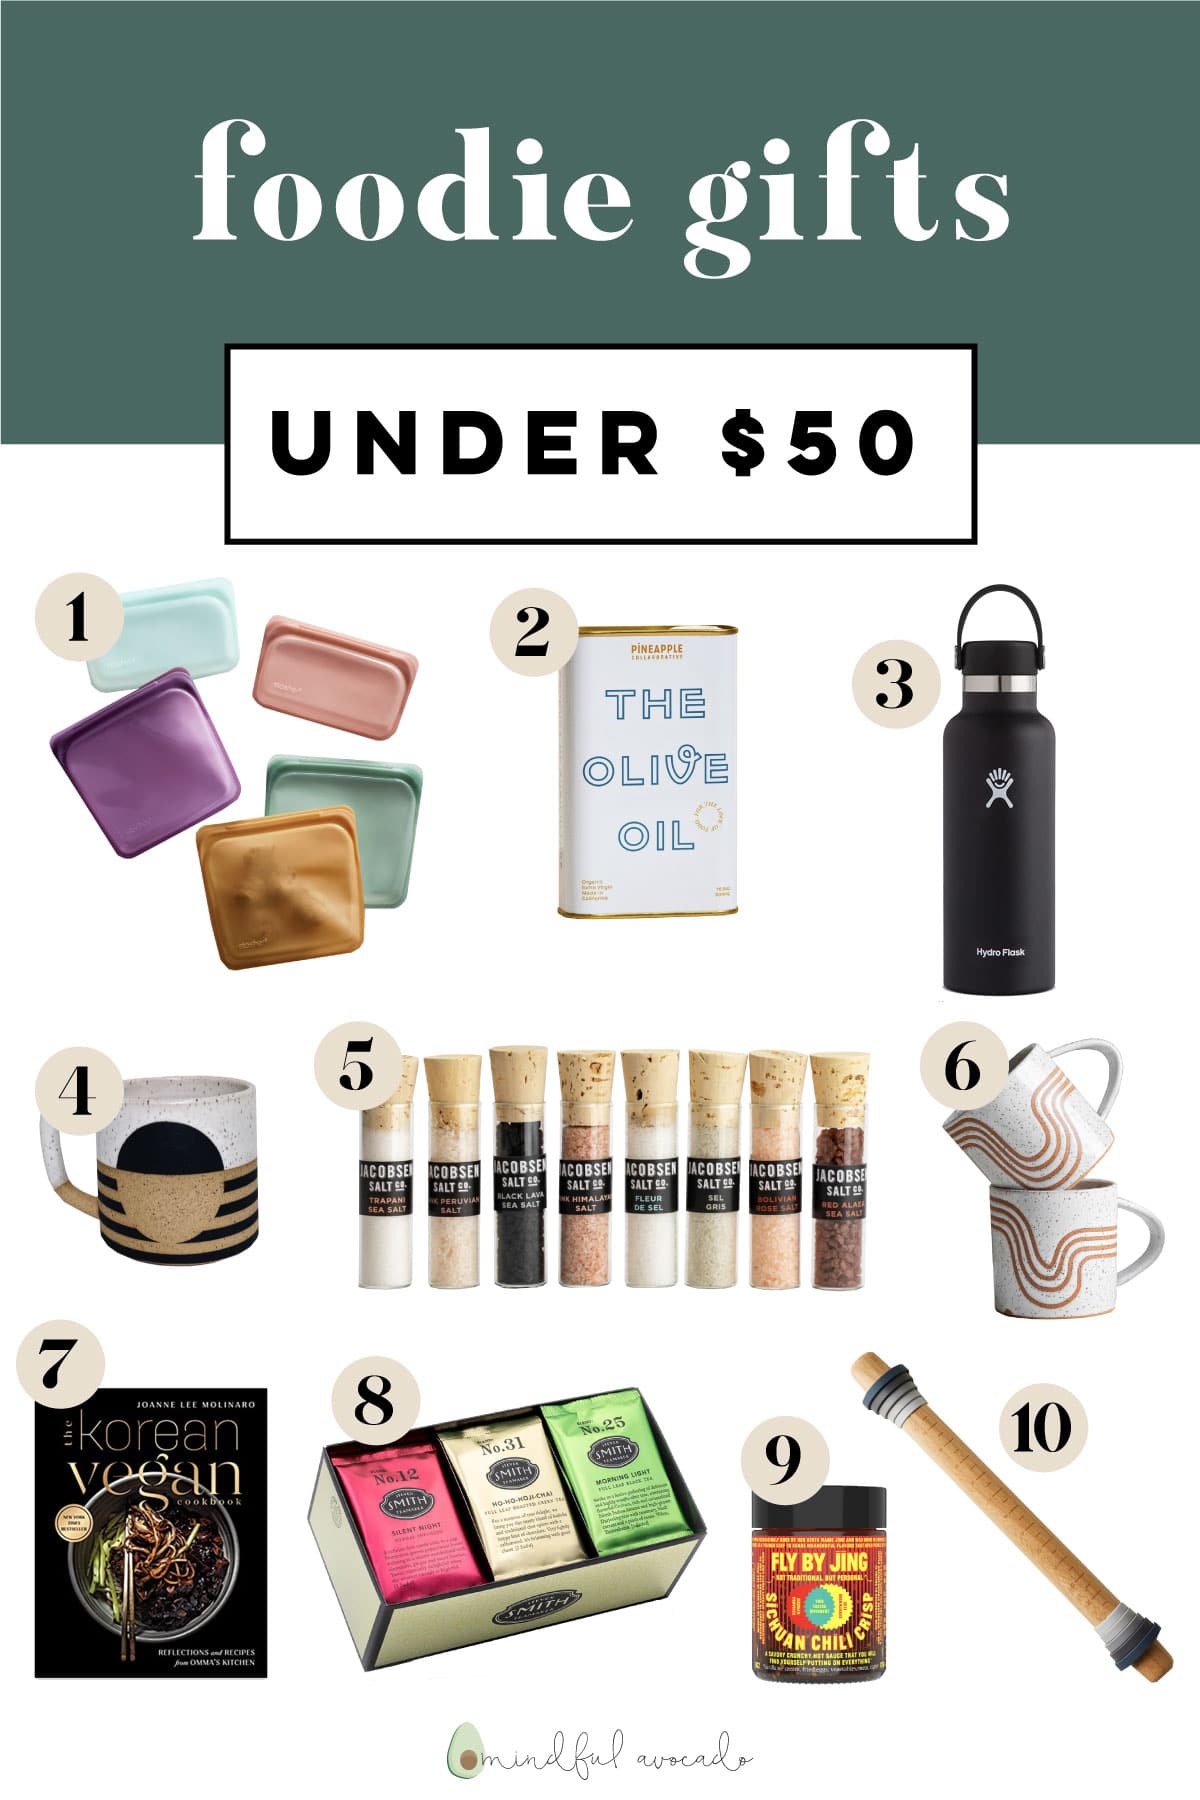 The Ultimate Gift Guide for the Foodie, Chef and Entertainer!